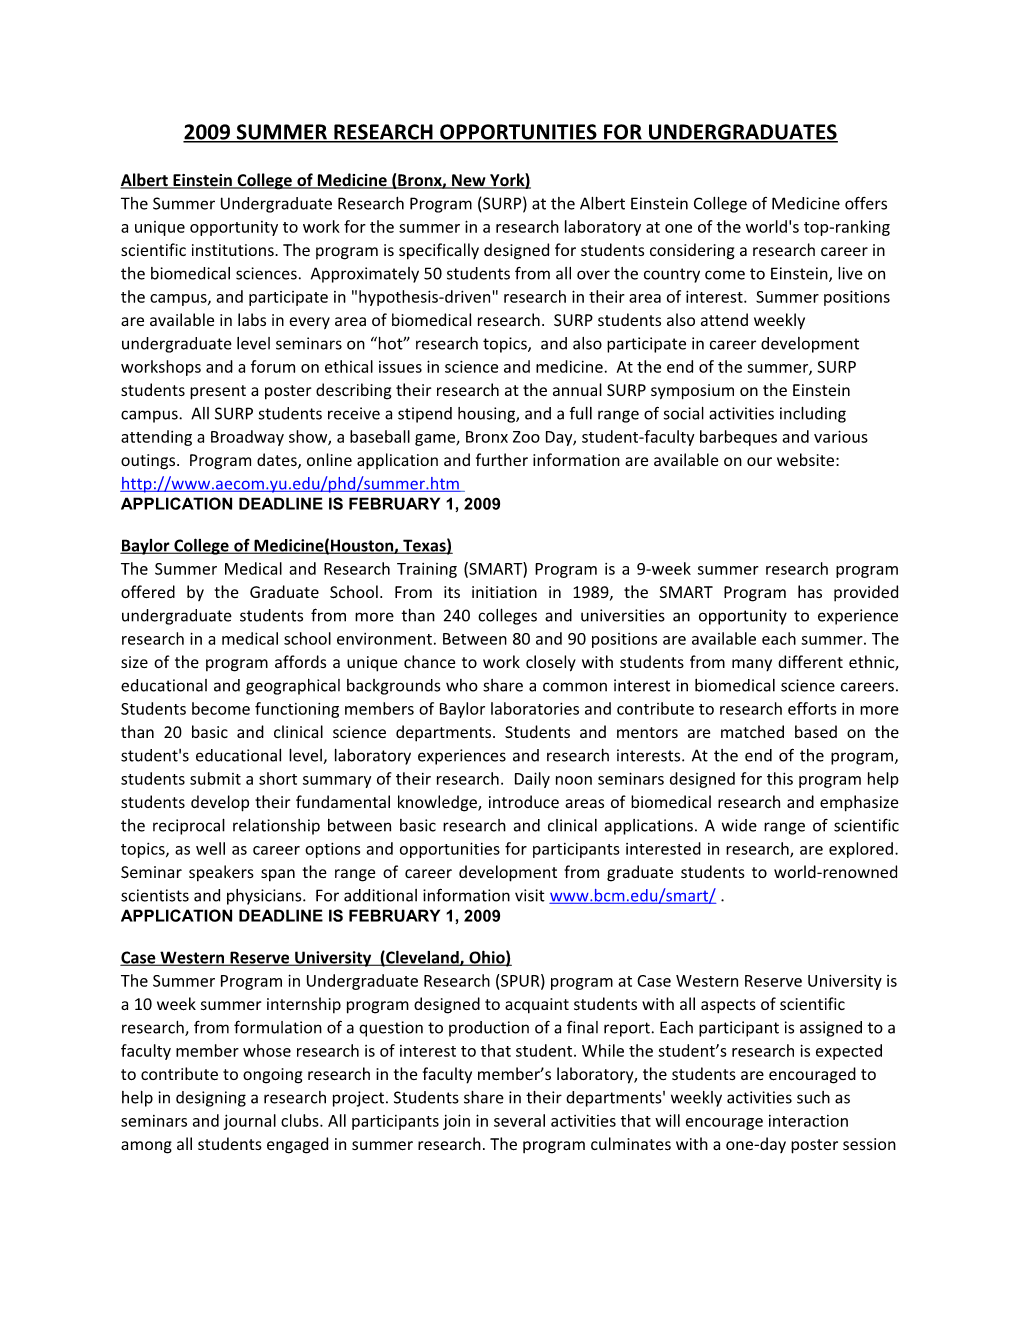 2009 Summer Research Opportunities for Undergraduates